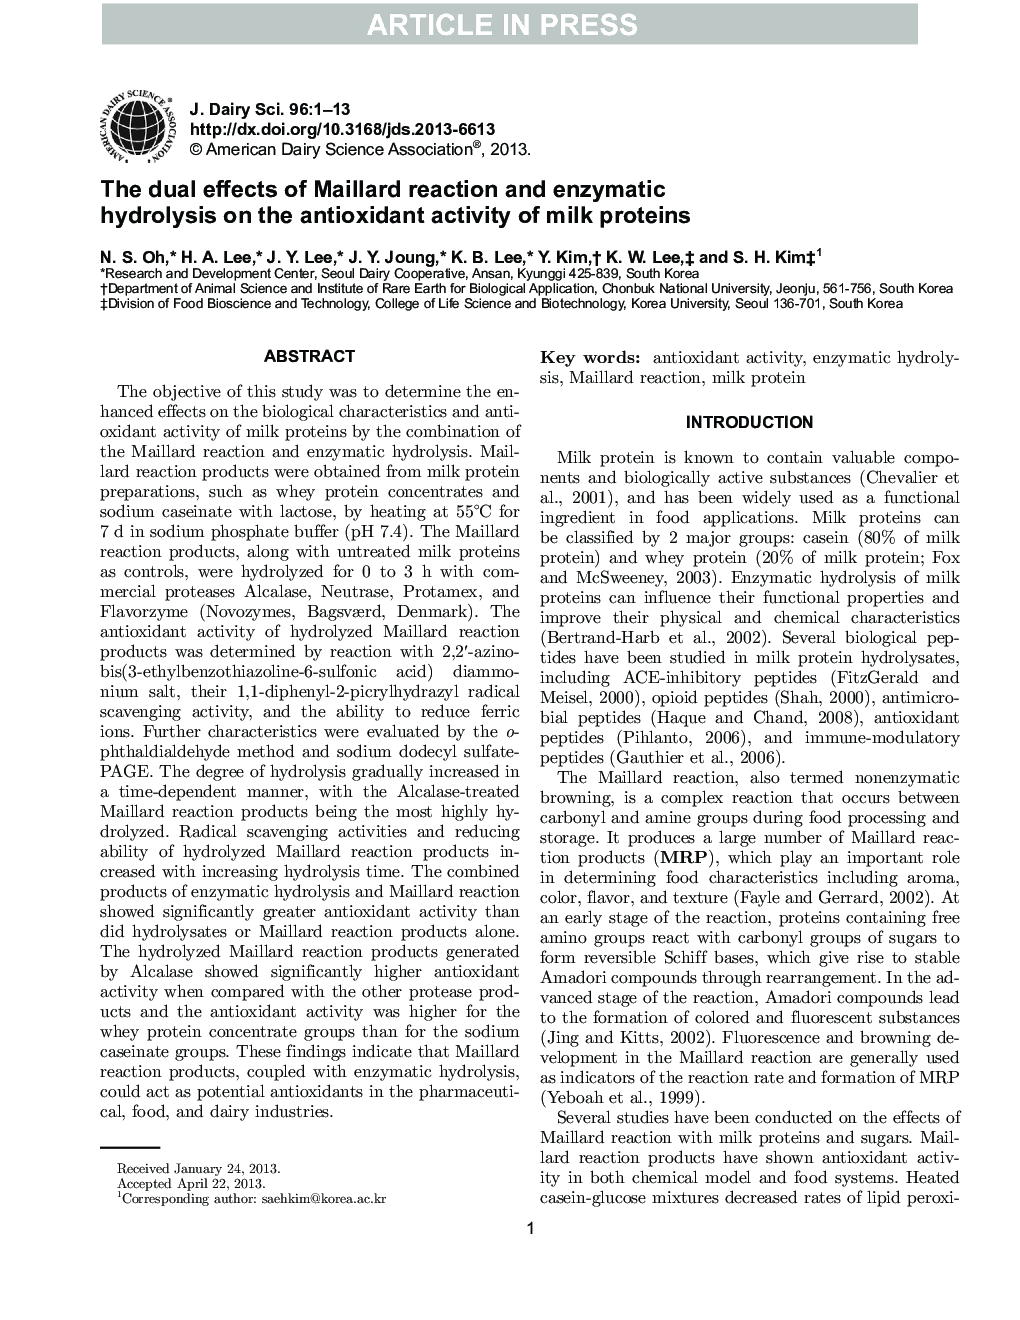 The dual effects of Maillard reaction and enzymatic hydrolysis on the antioxidant activity of milk proteins